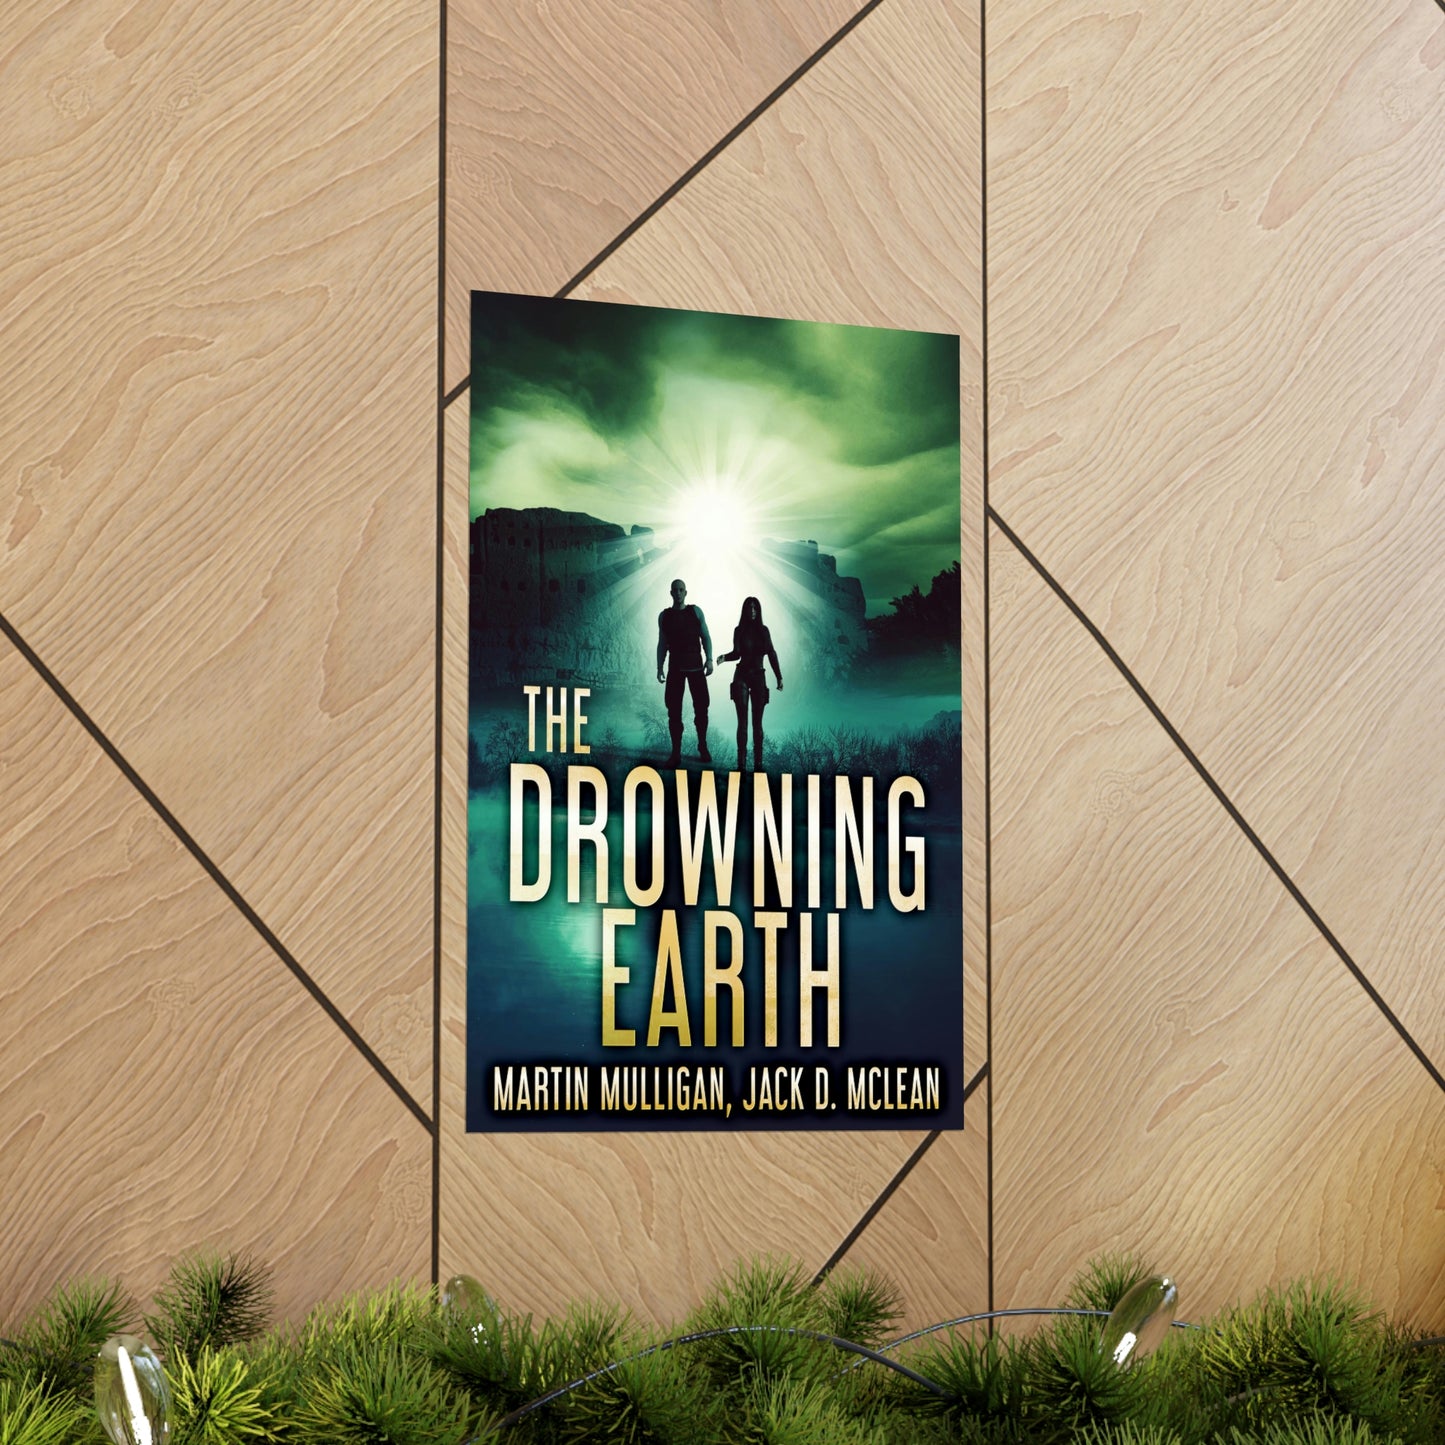 The Drowning Earth - Matte Poster